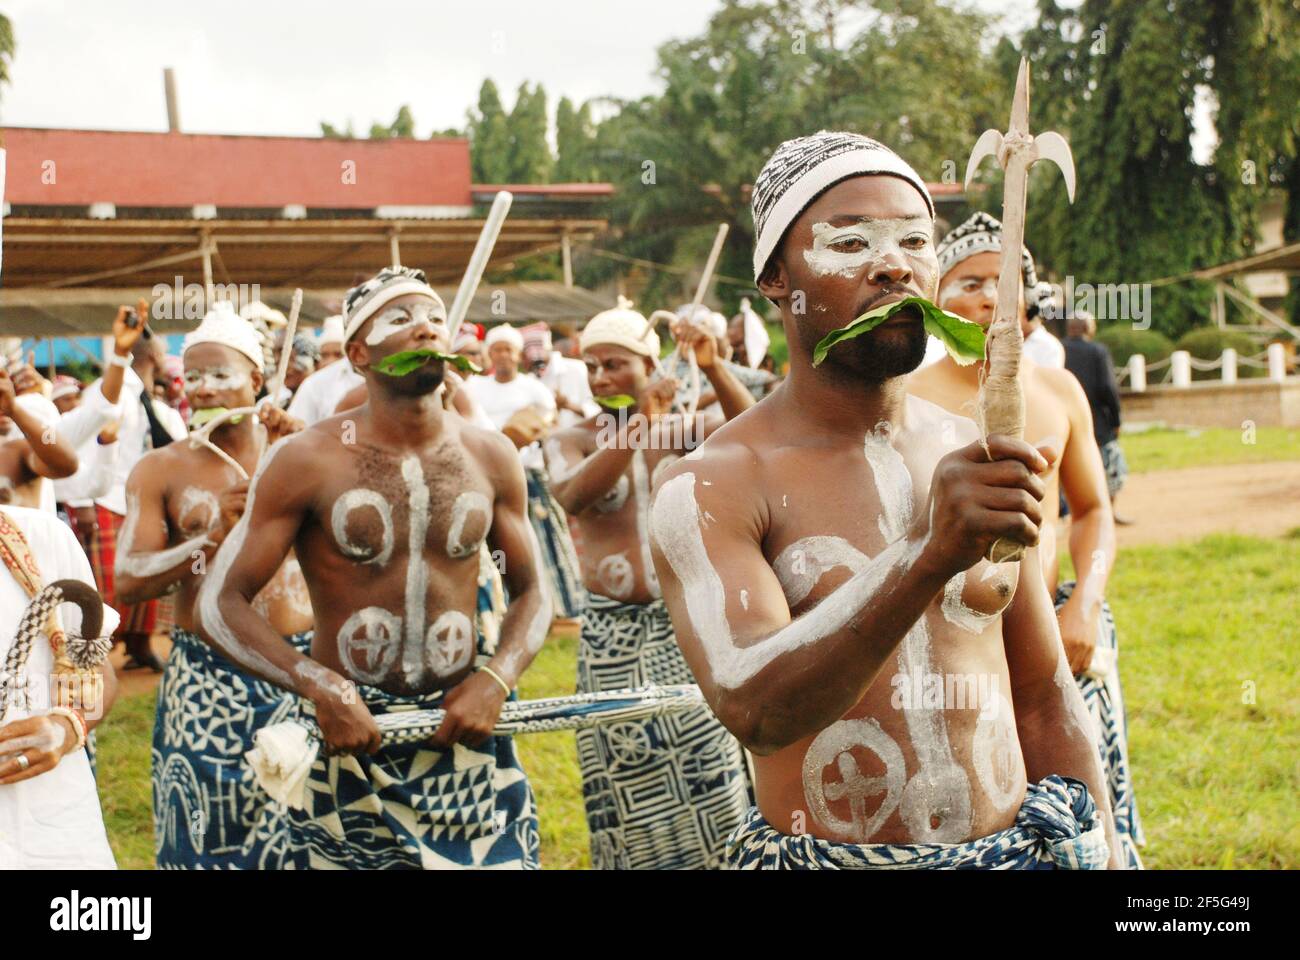 Igbo cultural troupes in action, Lagos, Nigeria. Stock Photo